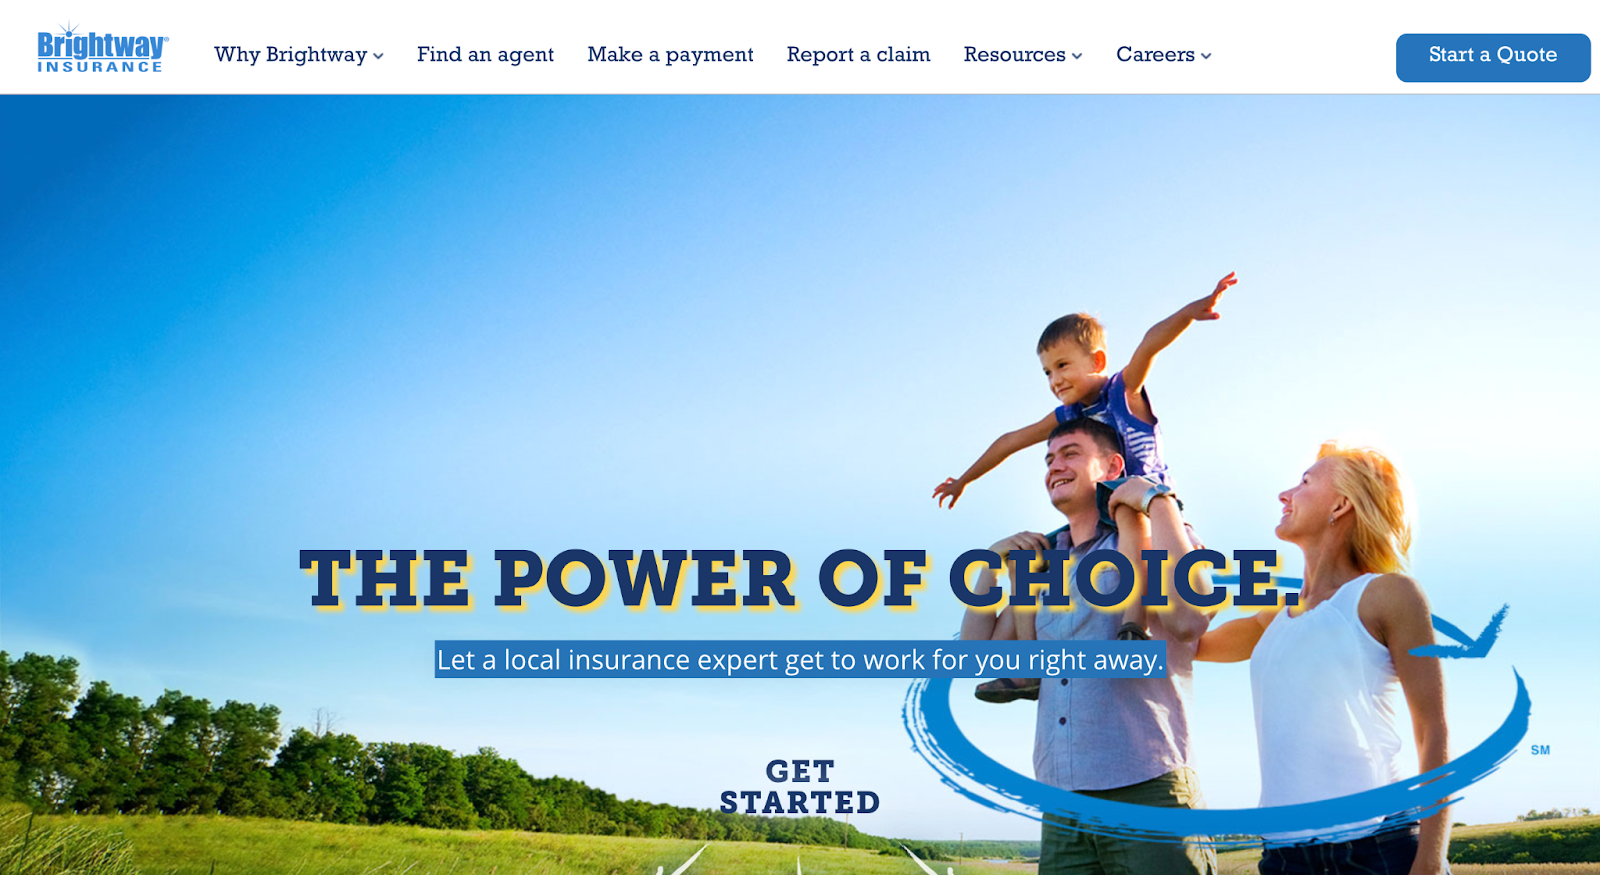 Insurance website design, example from Brightway Insurance